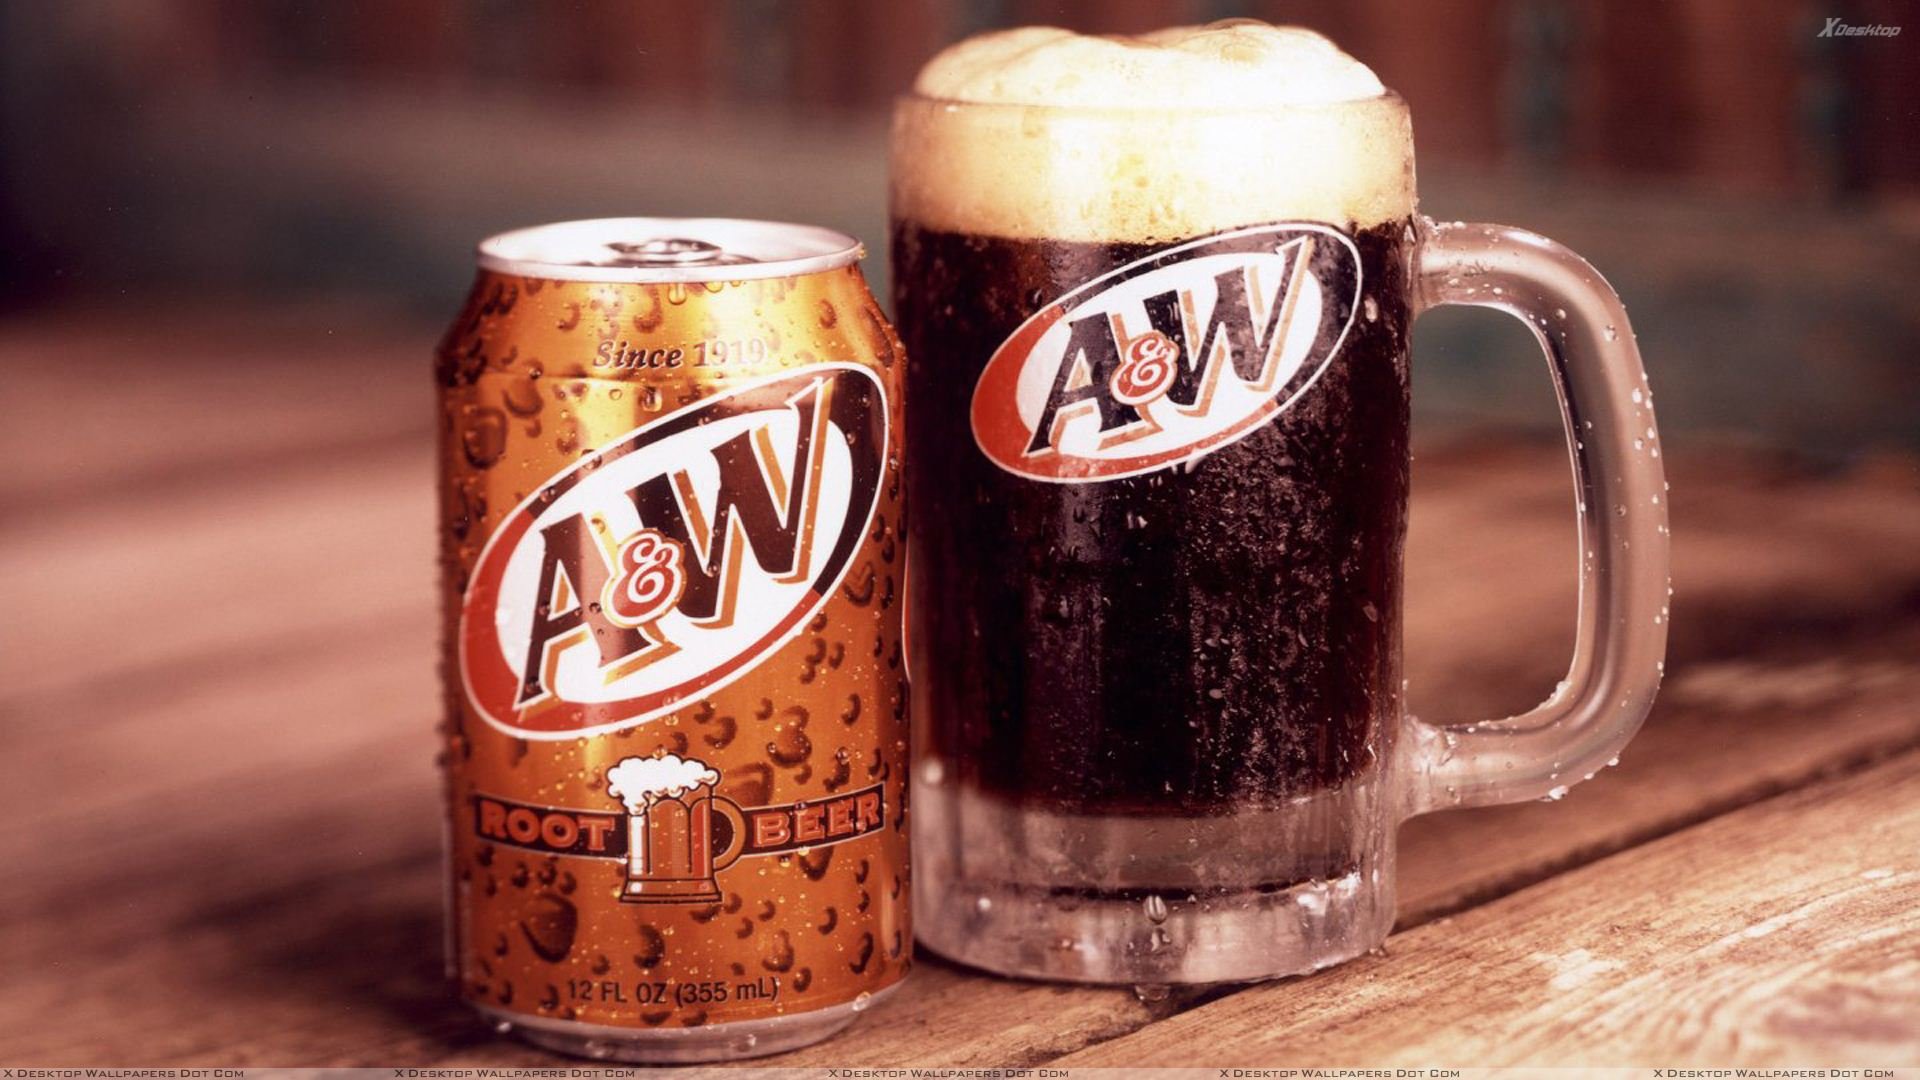 a-w-delicious-root-beer-fresh-drink-in-summer-holiday-1920x1080.jpg